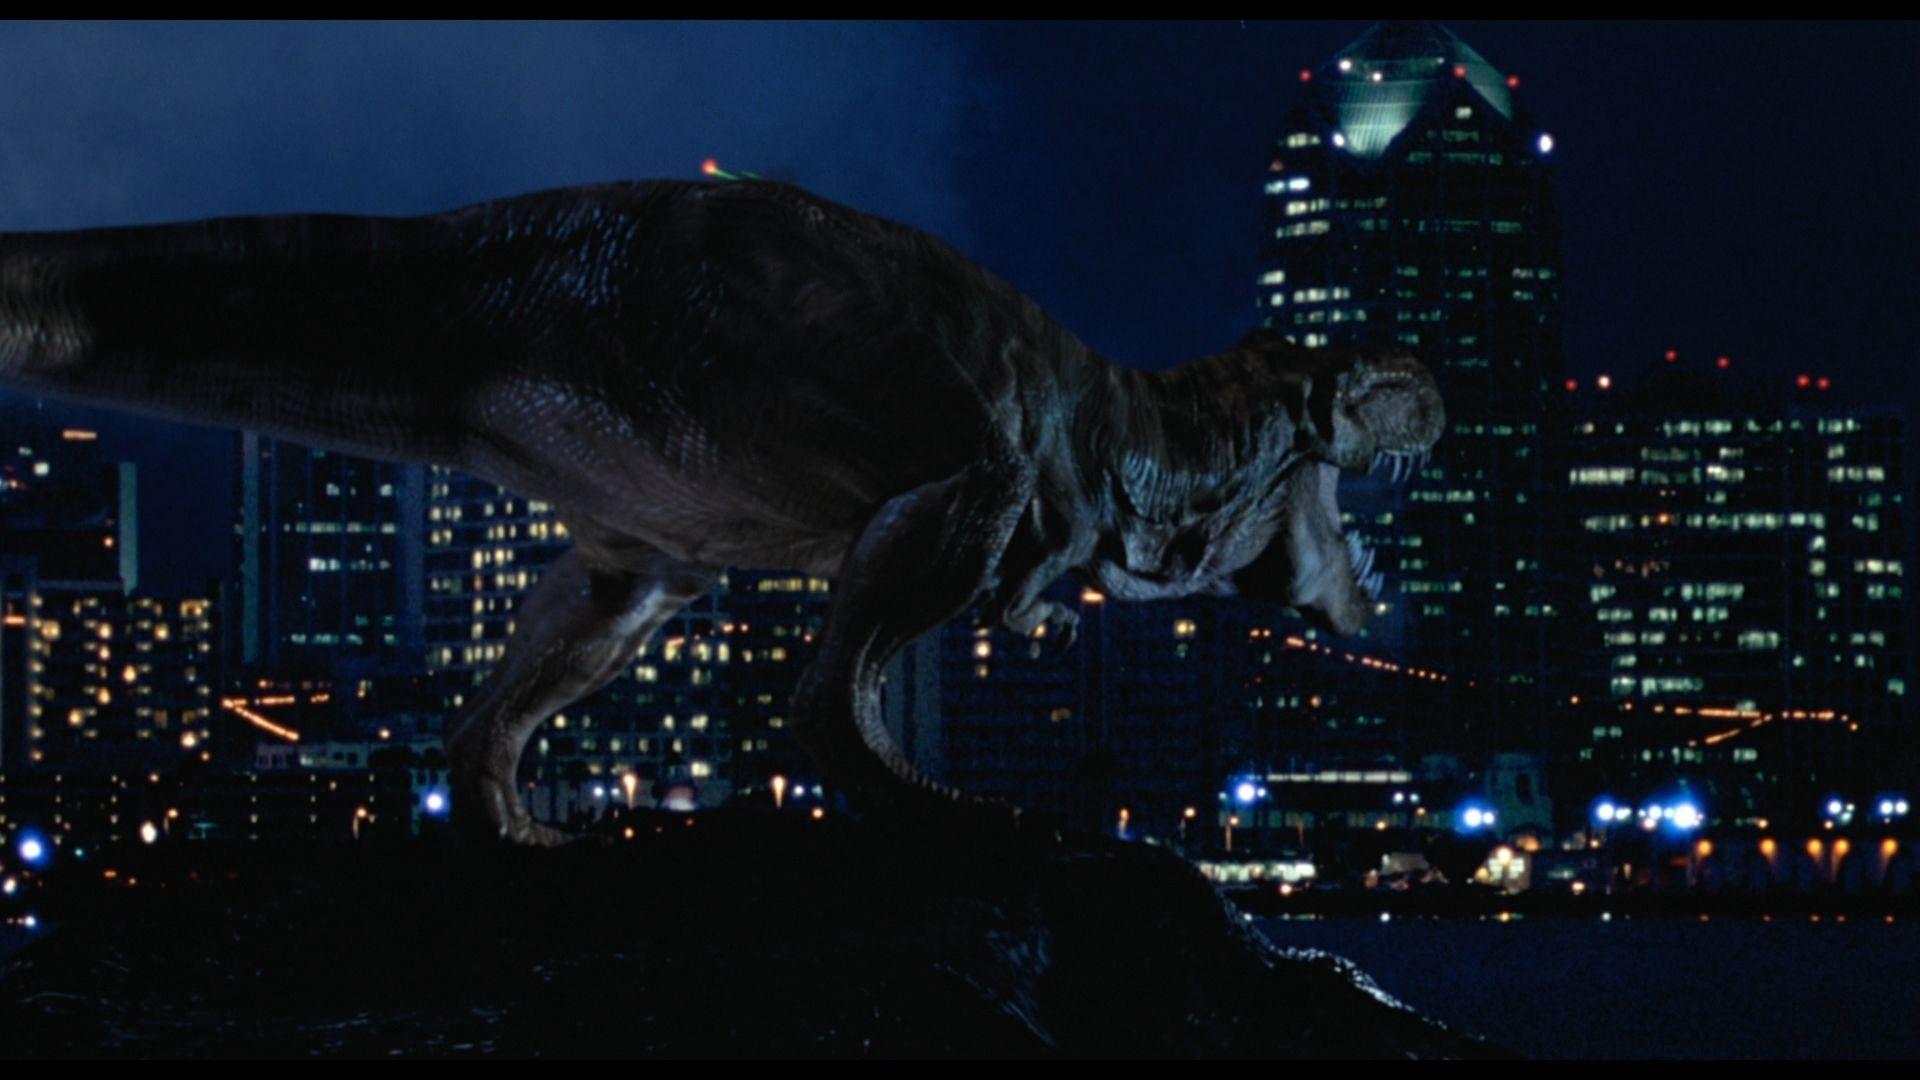 Review: “The Lost World: Jurassic Park”. The Viewer's Commentary